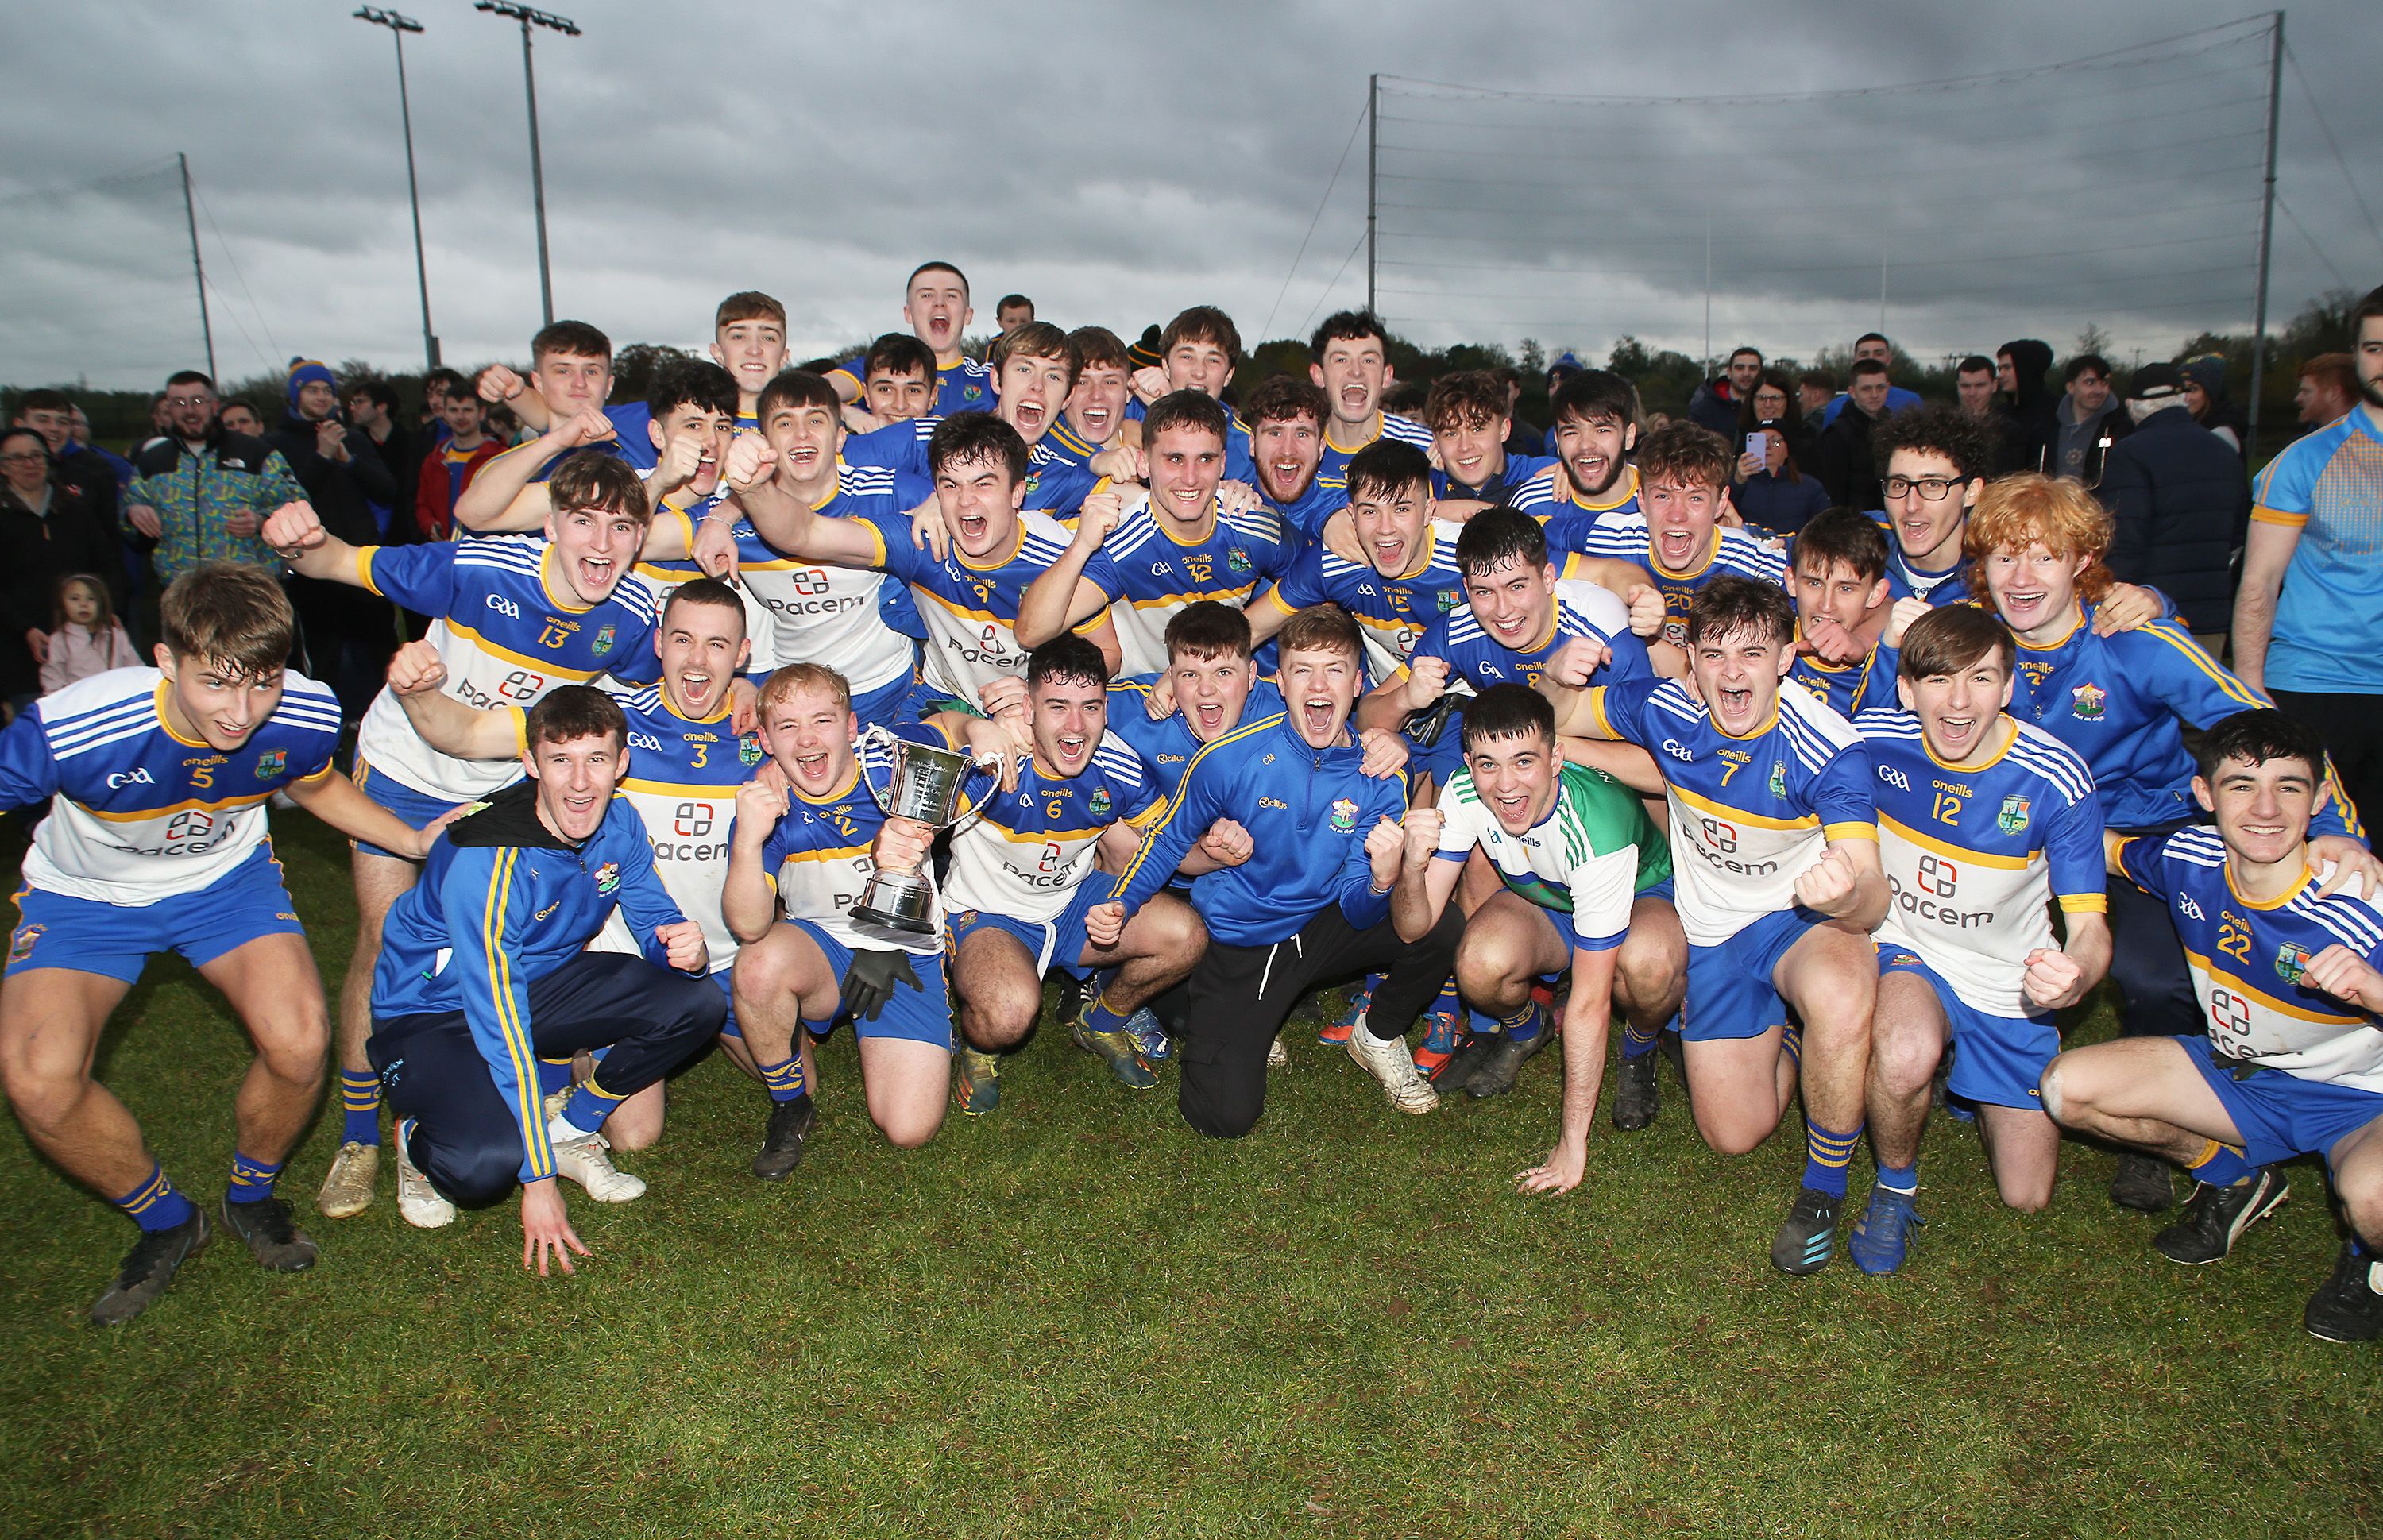 St Brigid\'s celebrate having been crowned Antrim U20 football champions at Dunsilly on Saturday 